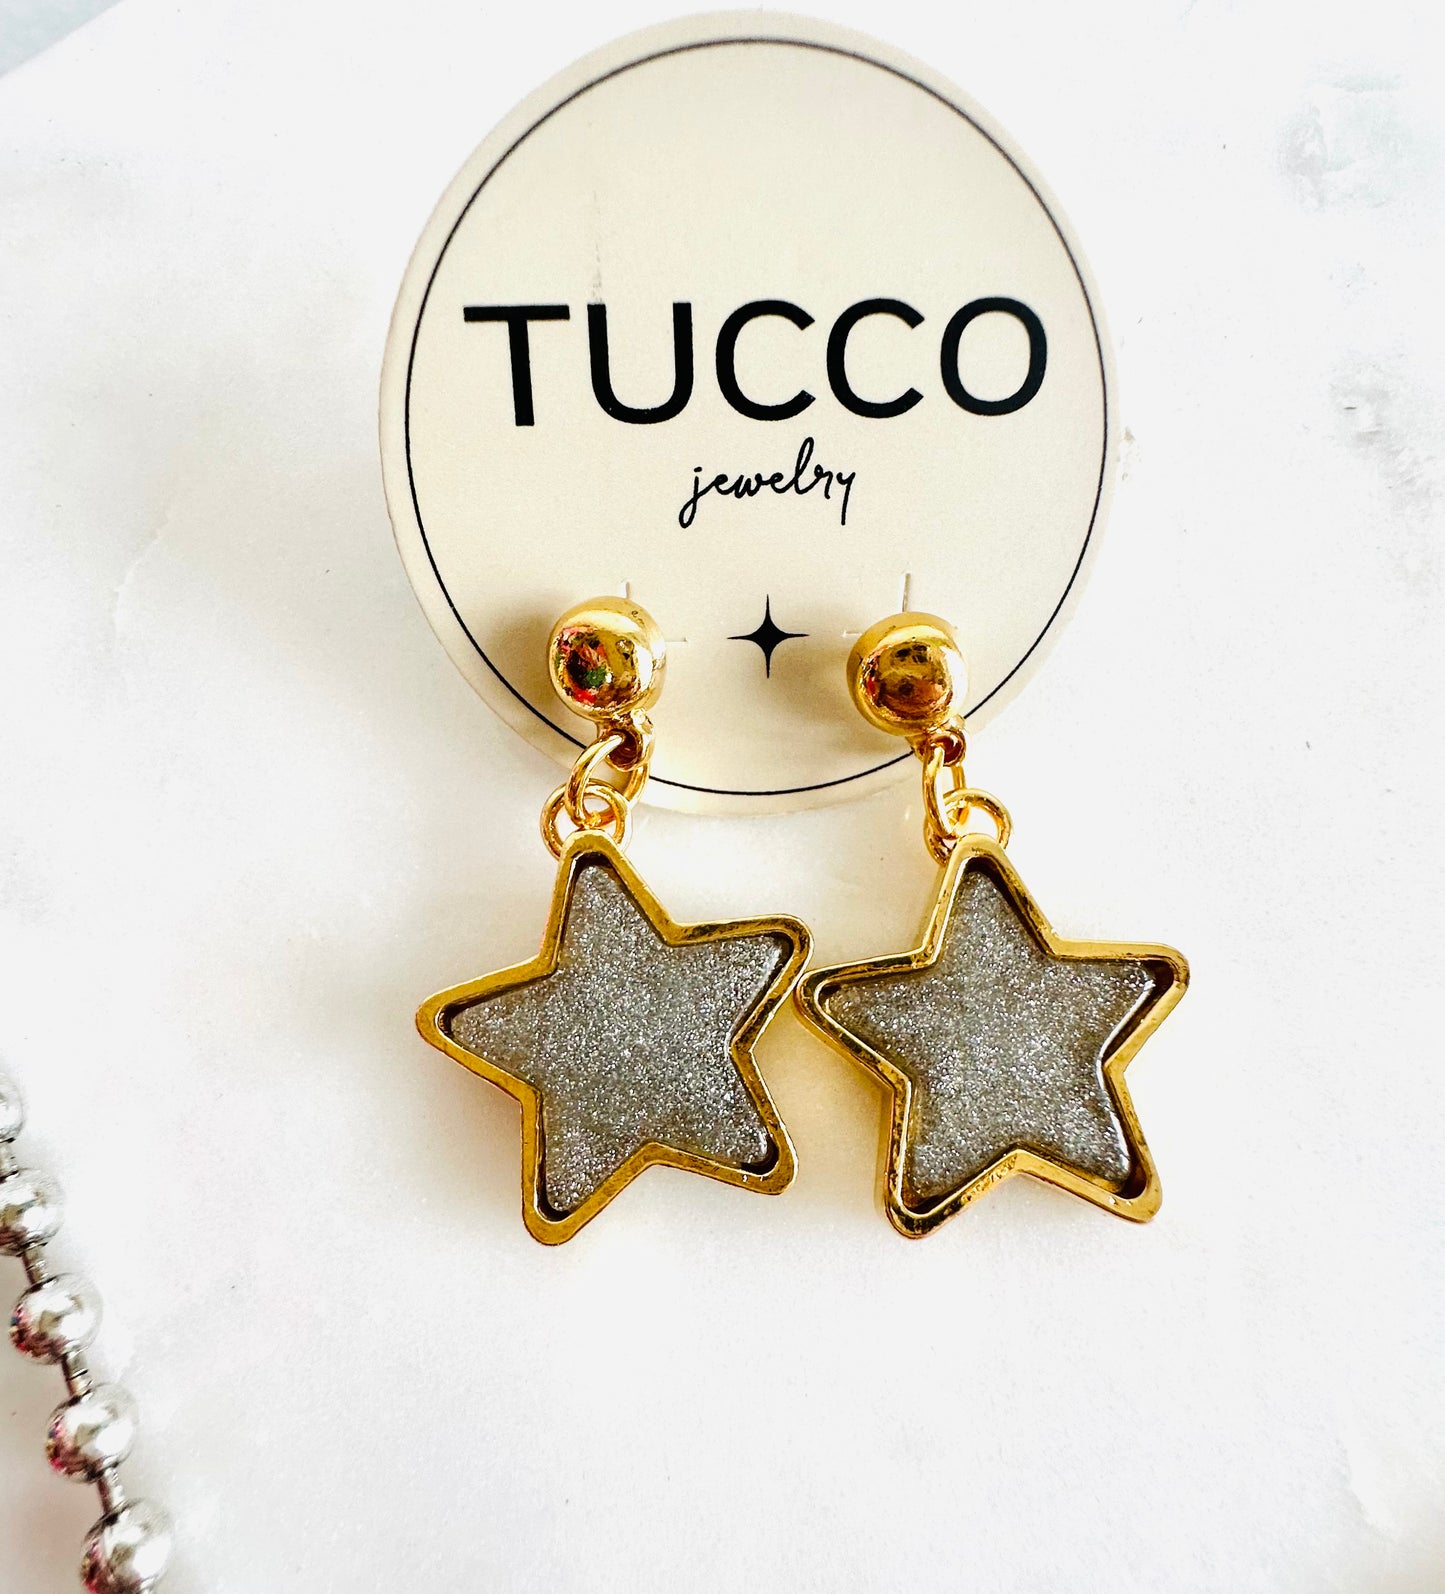 Tucco Gold/Silver Super Star Collection